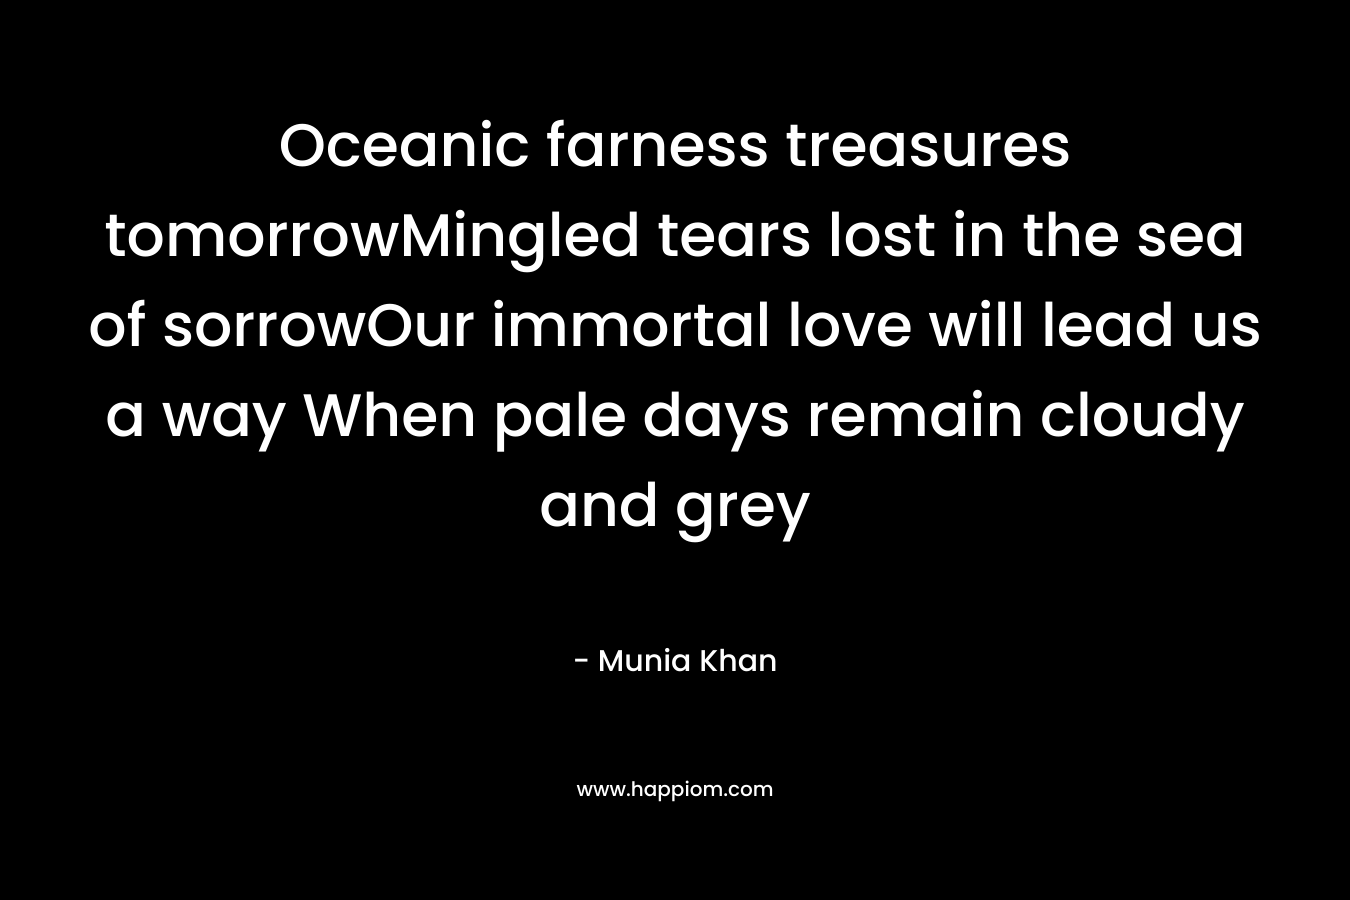 Oceanic farness treasures tomorrowMingled tears lost in the sea of sorrowOur immortal love will lead us a way When pale days remain cloudy and grey